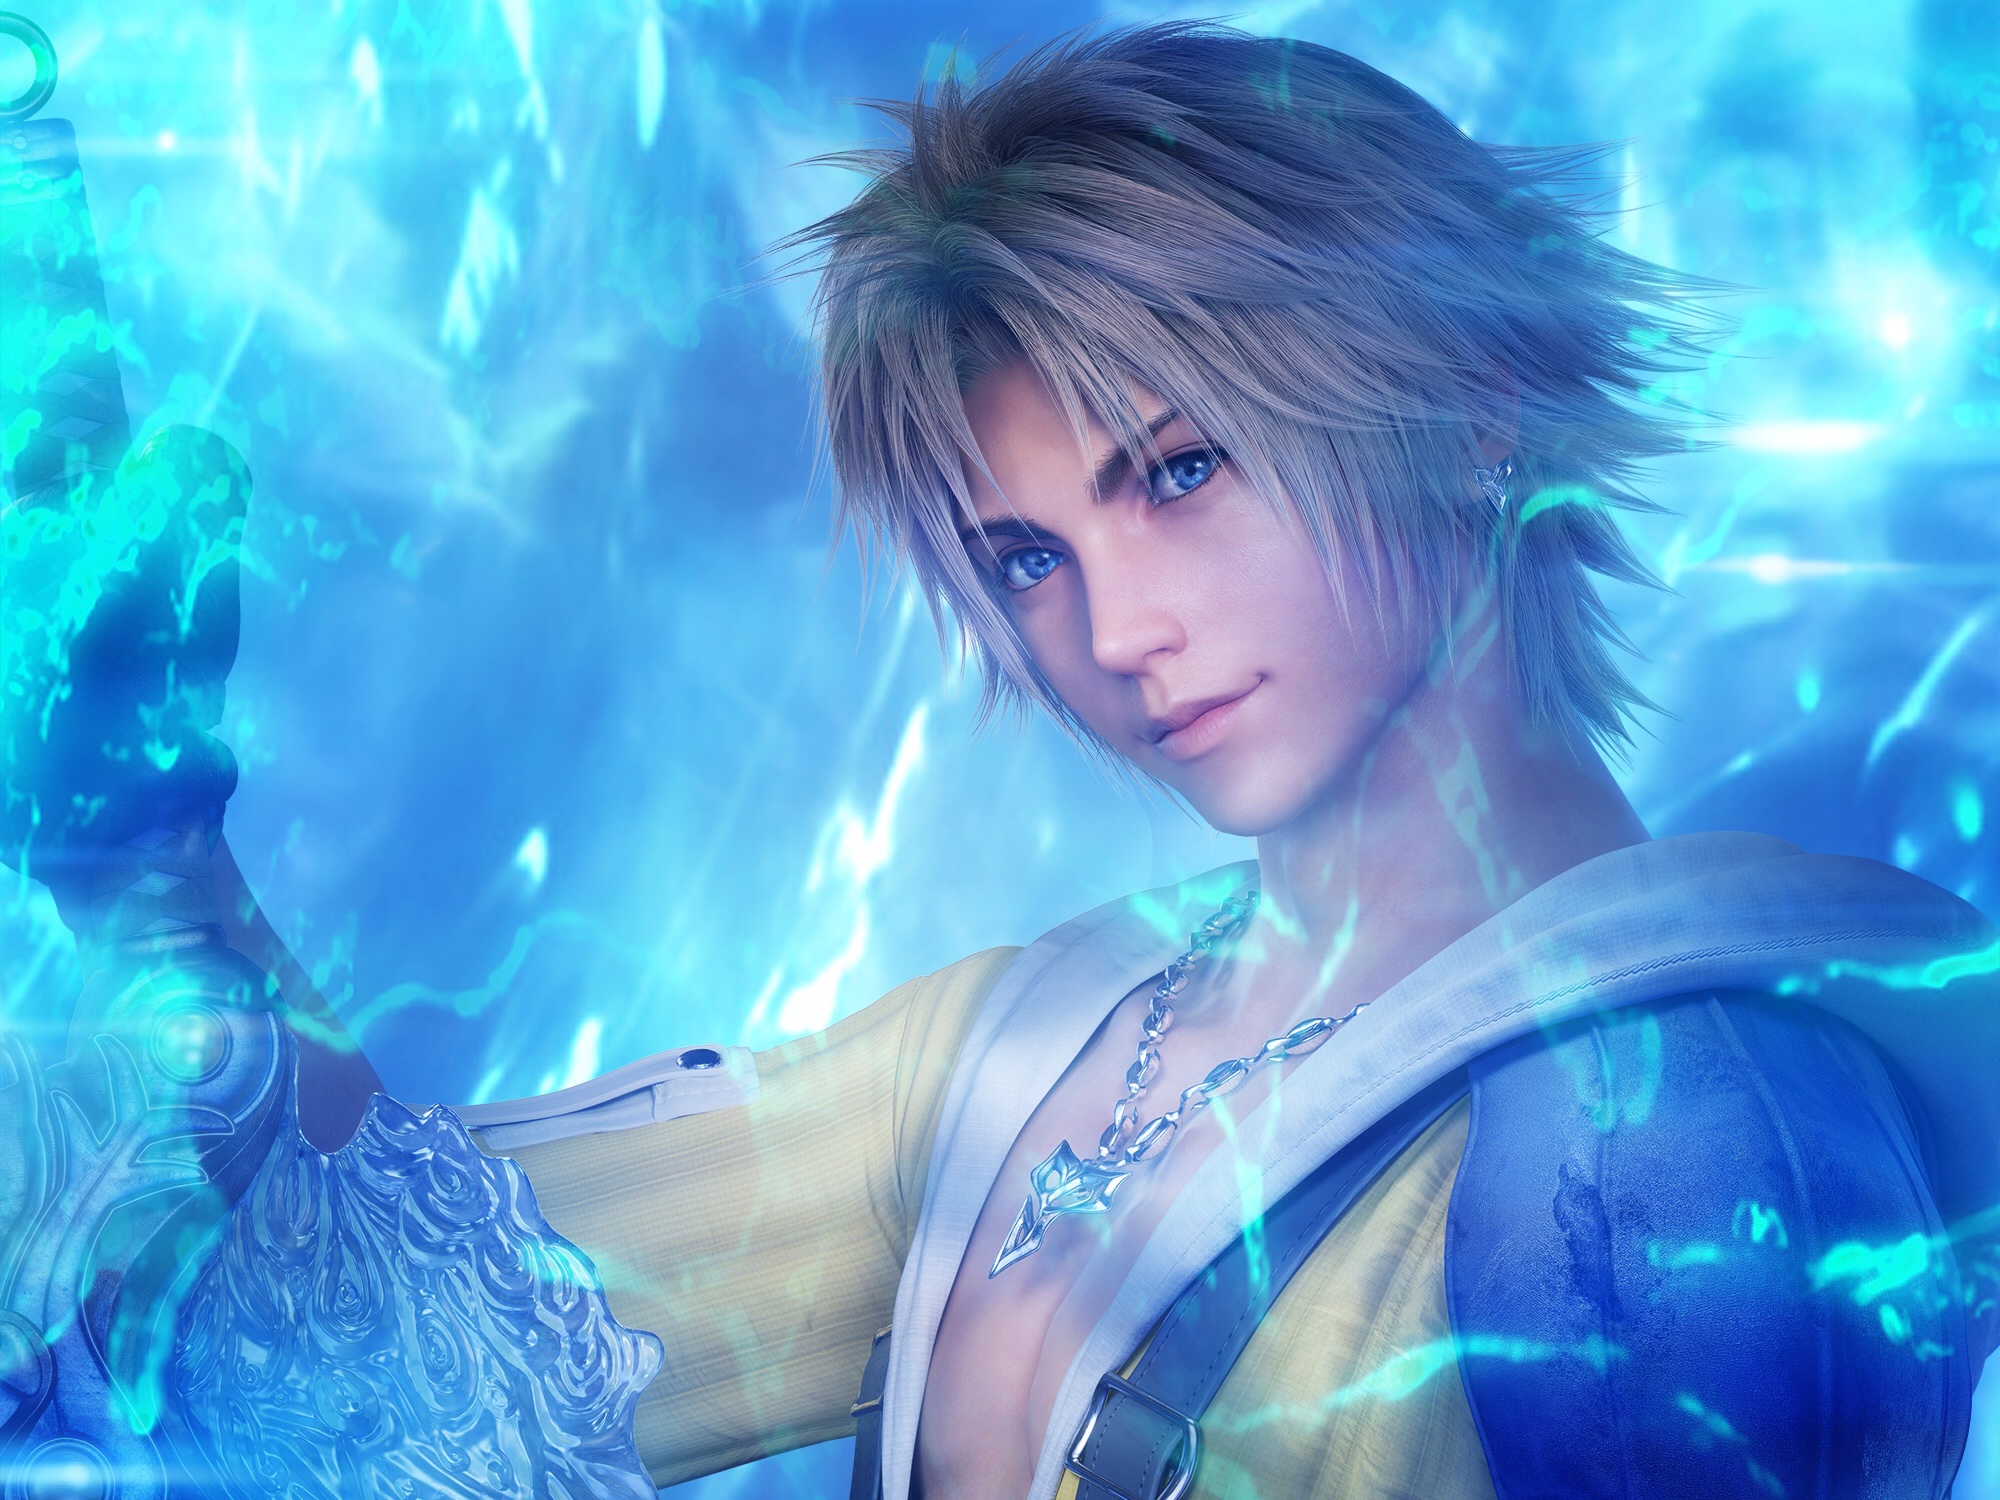 Final Fantasy X: How to Get Blue Hair for Tidus - wide 9